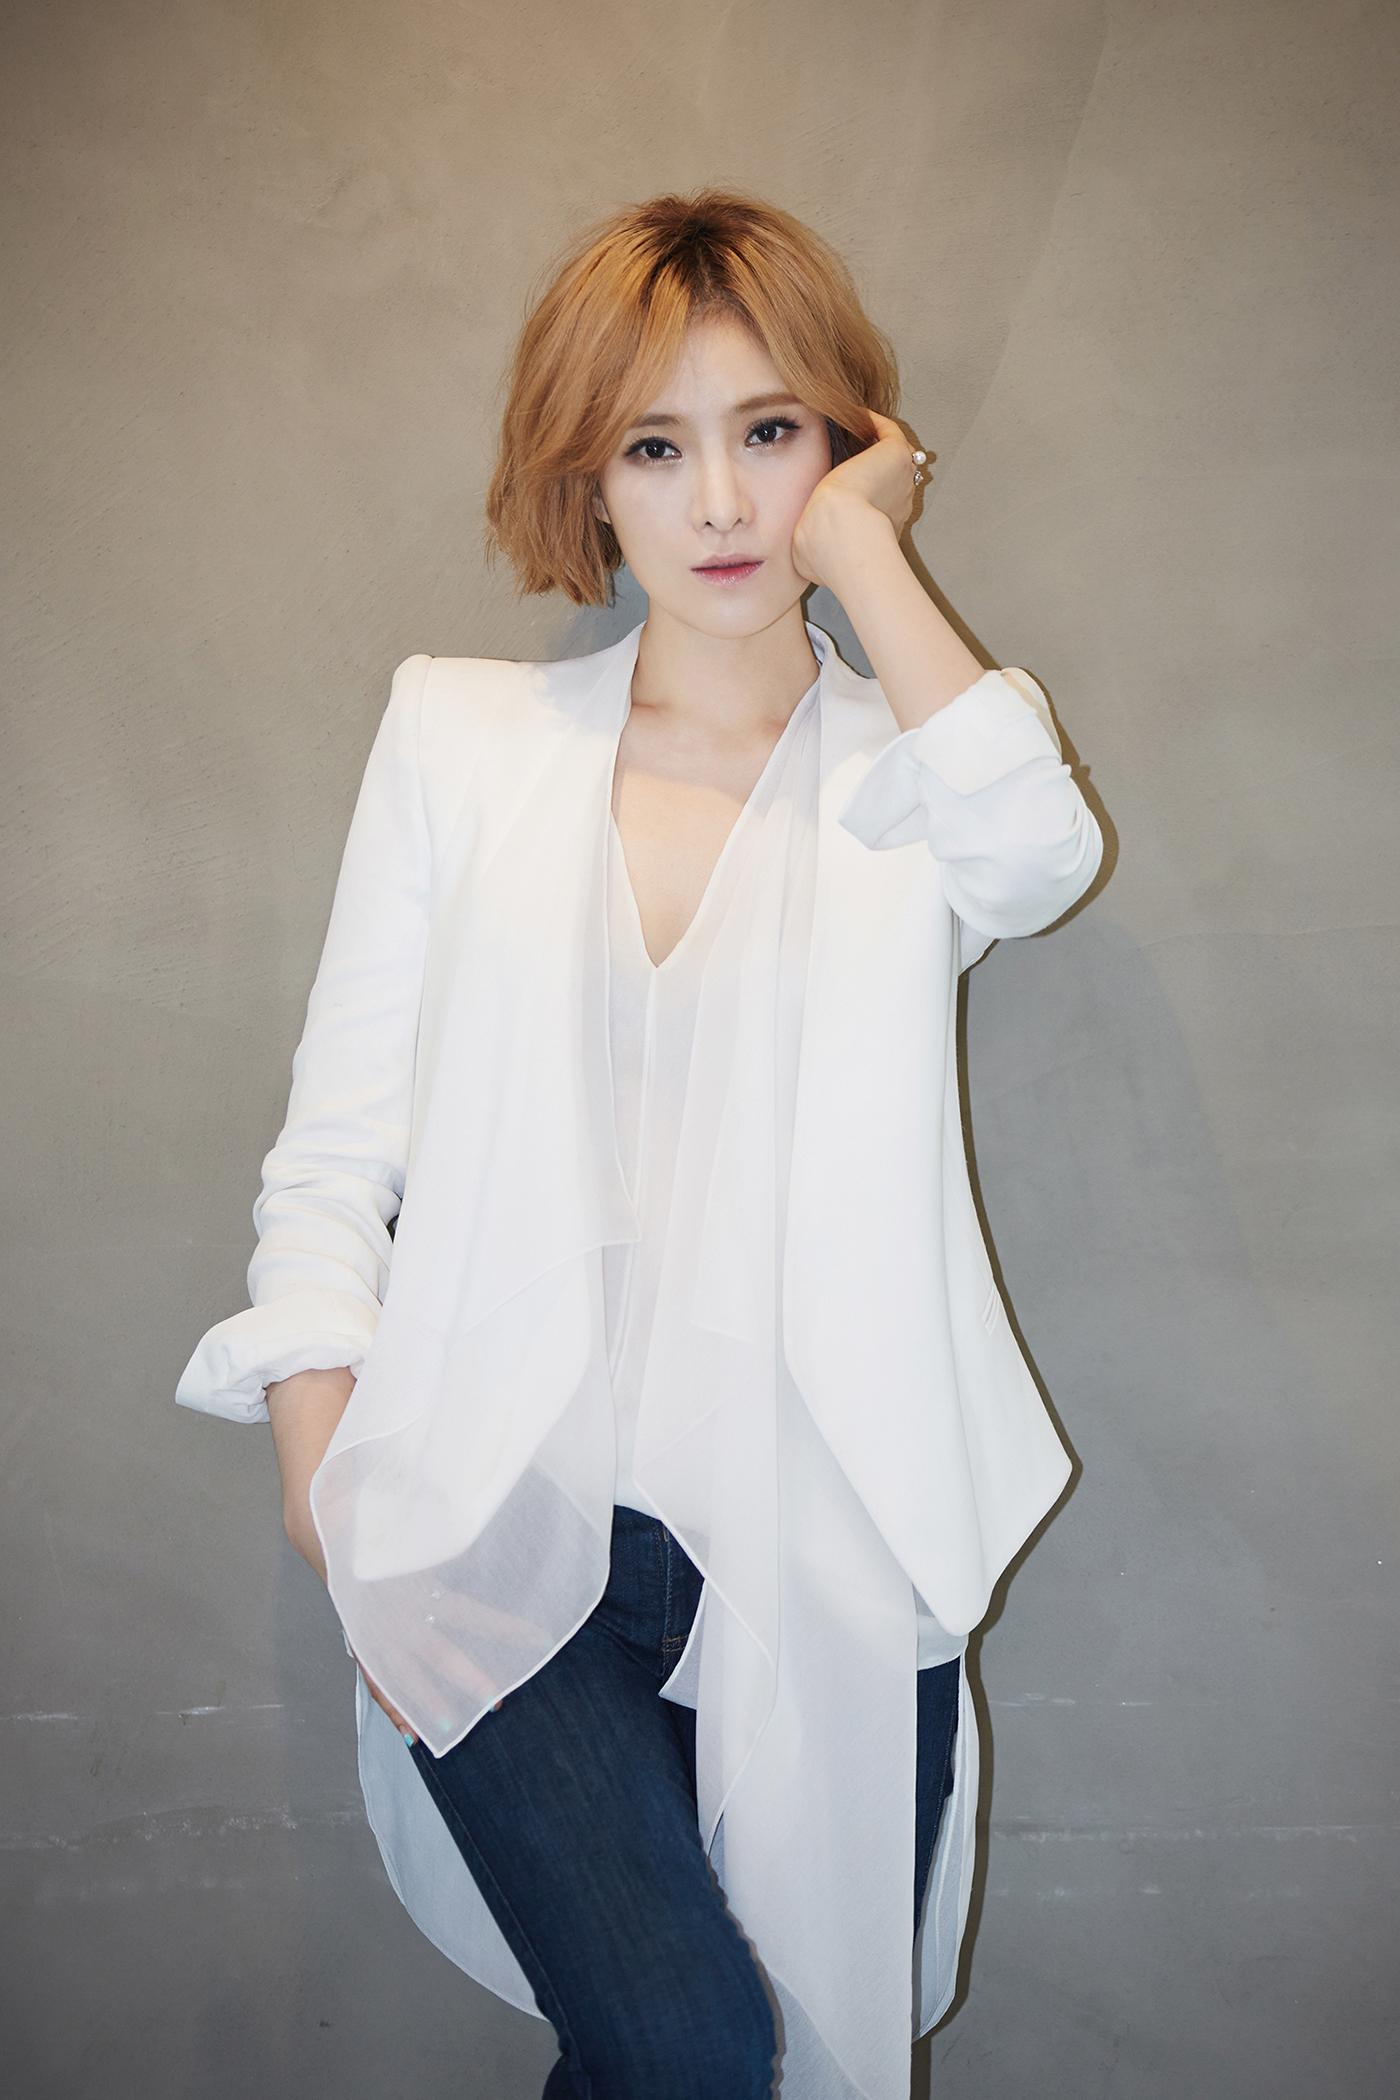 gummy-to-release-new-ost-my-love-for-sbs-the-king-eternal-monarch-on-may-23-3